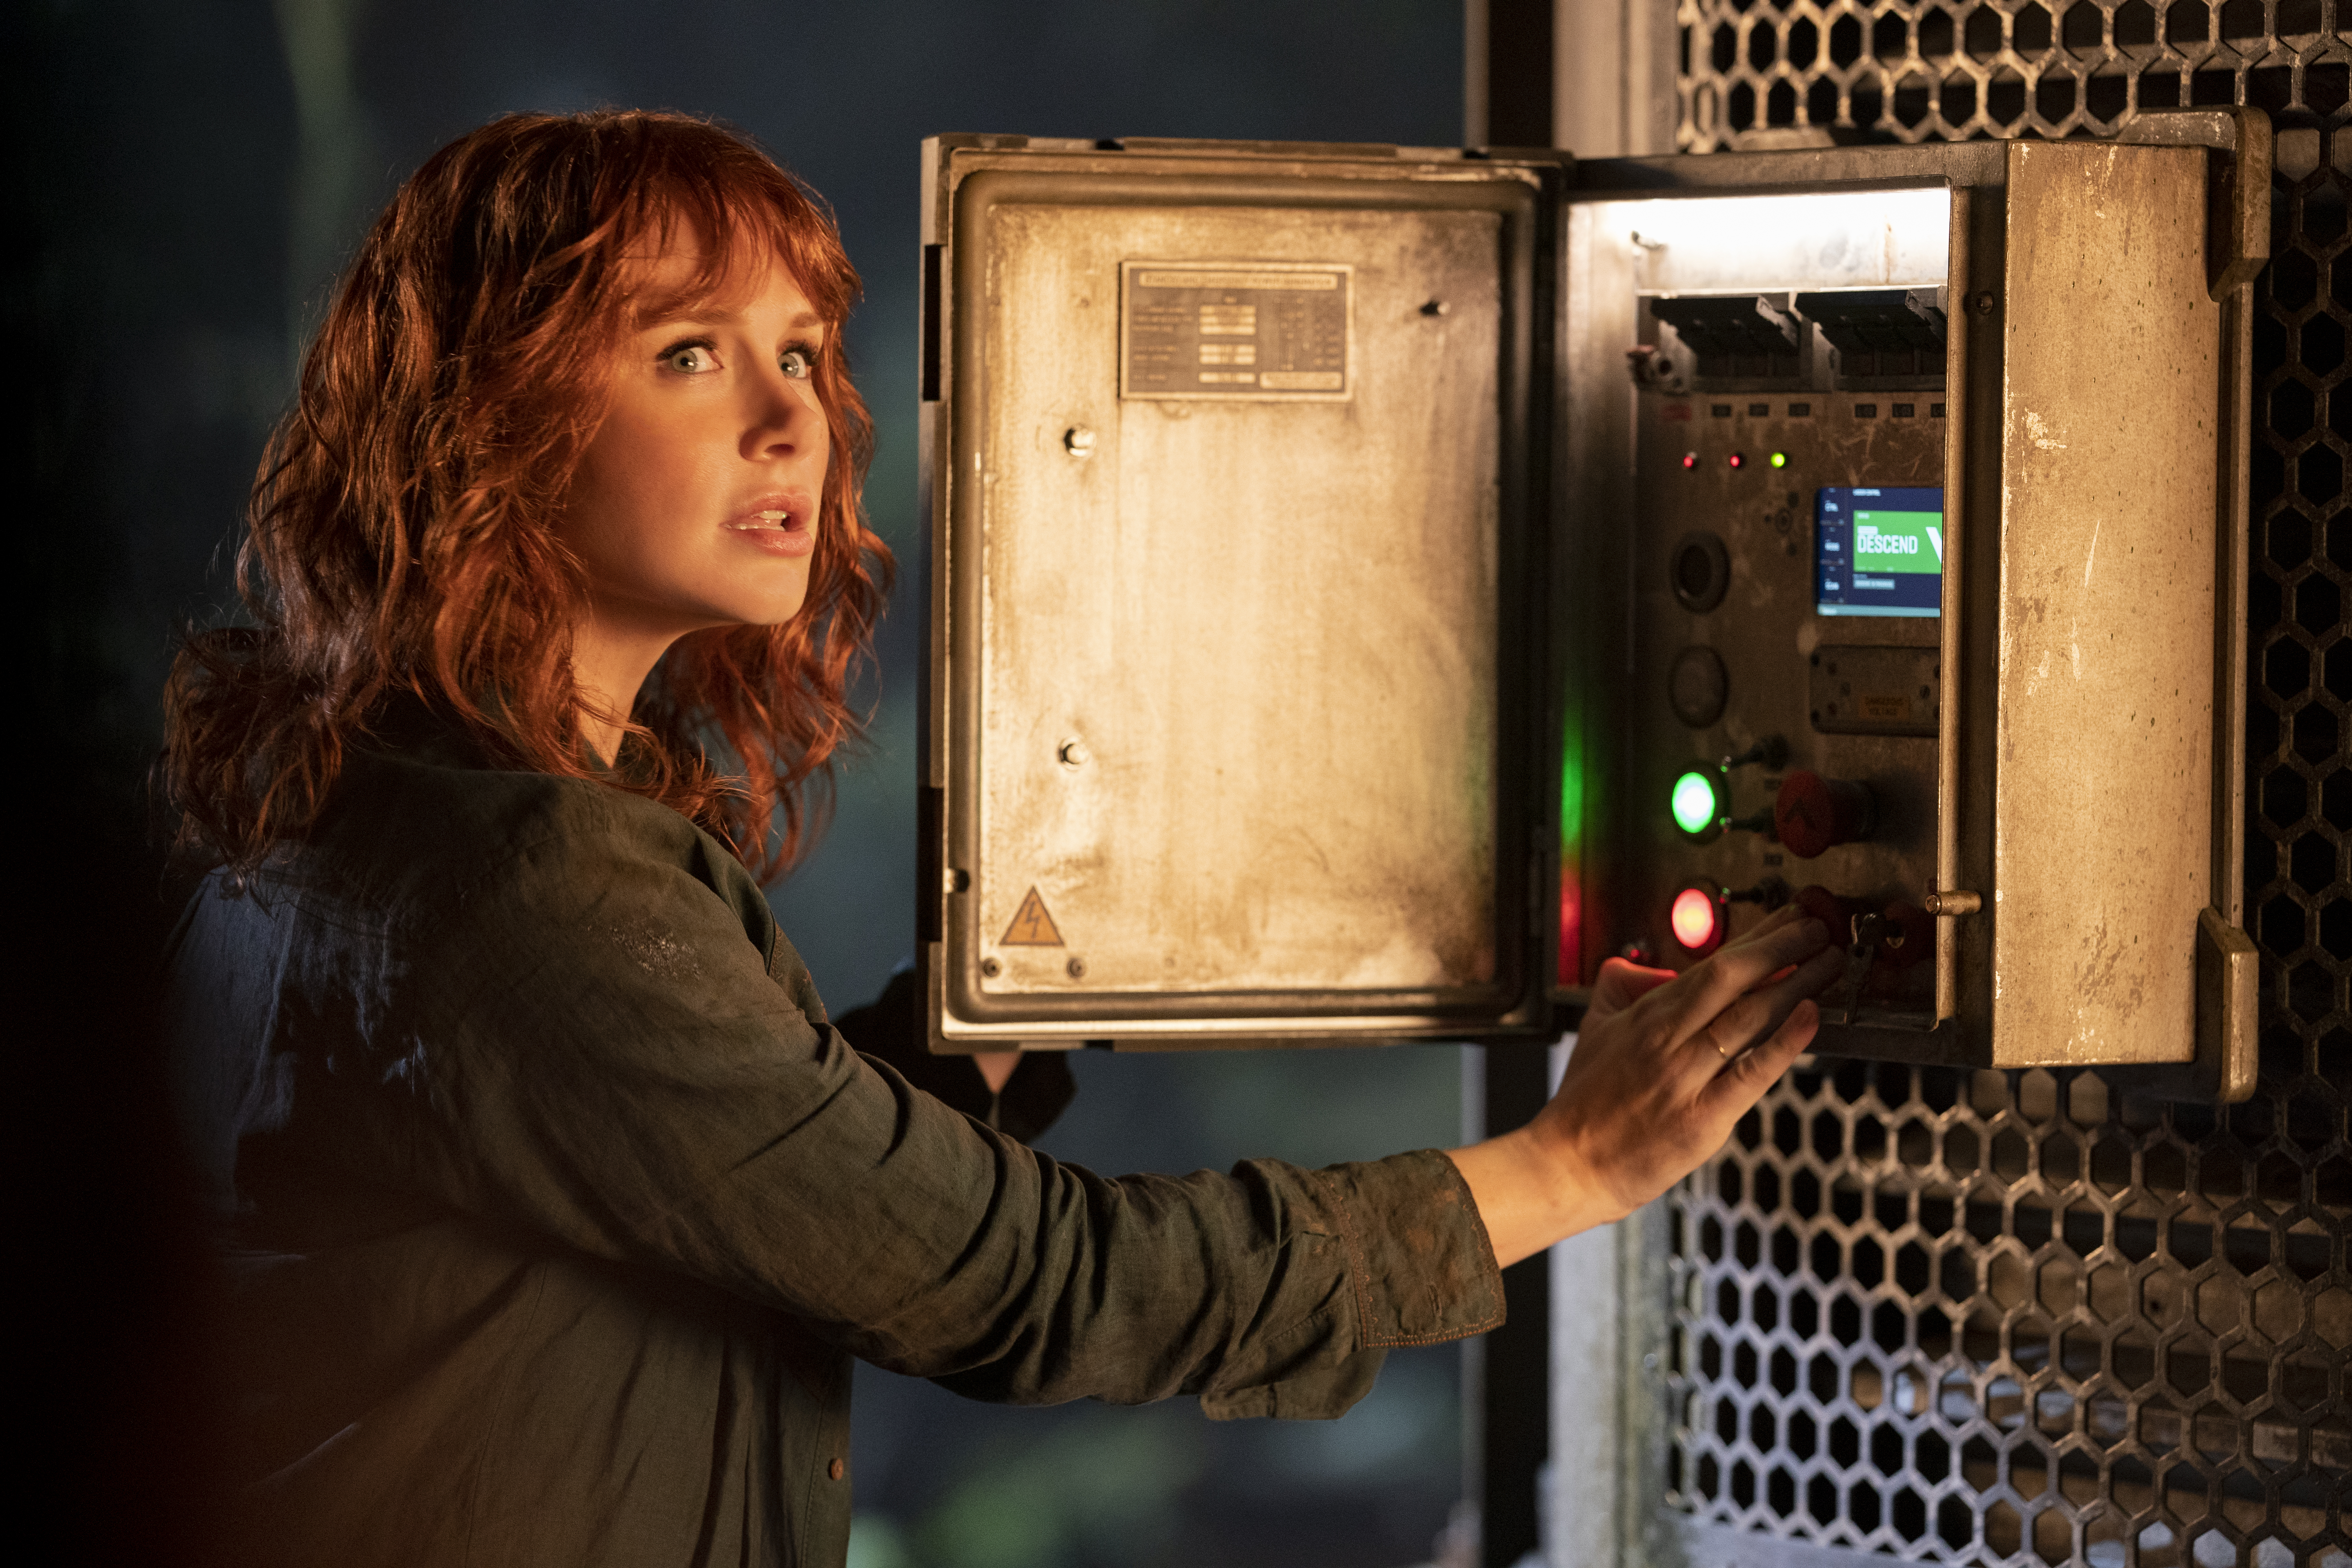 Bryce Dallas Howard as Claire Dearing in Jurassic World Dominion, co-written and directed by Colin Trevorrow.